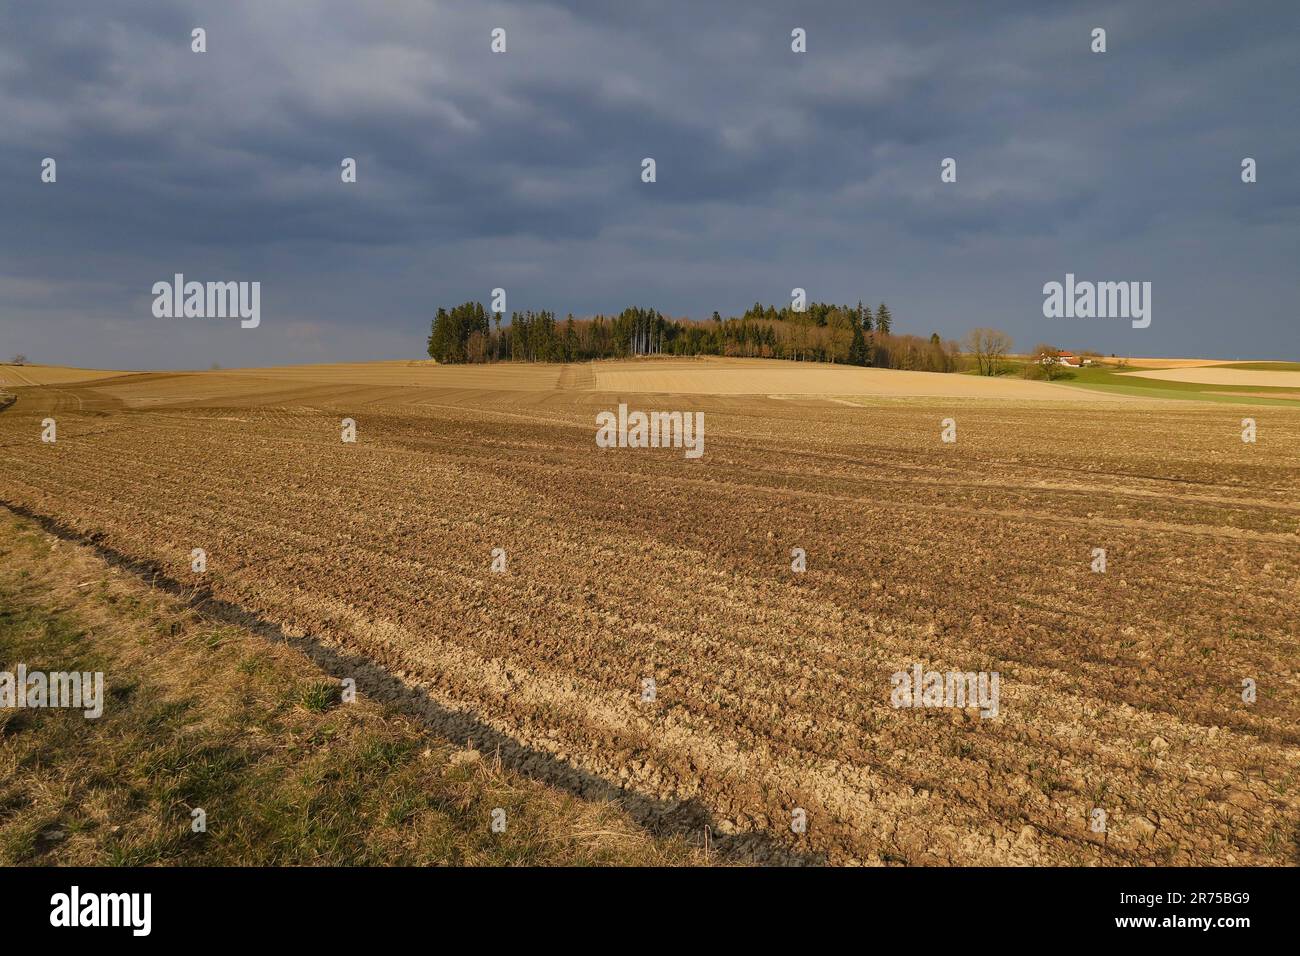 Cleared agricultural landscape, raw soil exposed to the elements, Germany, Bavaria Stock Photo